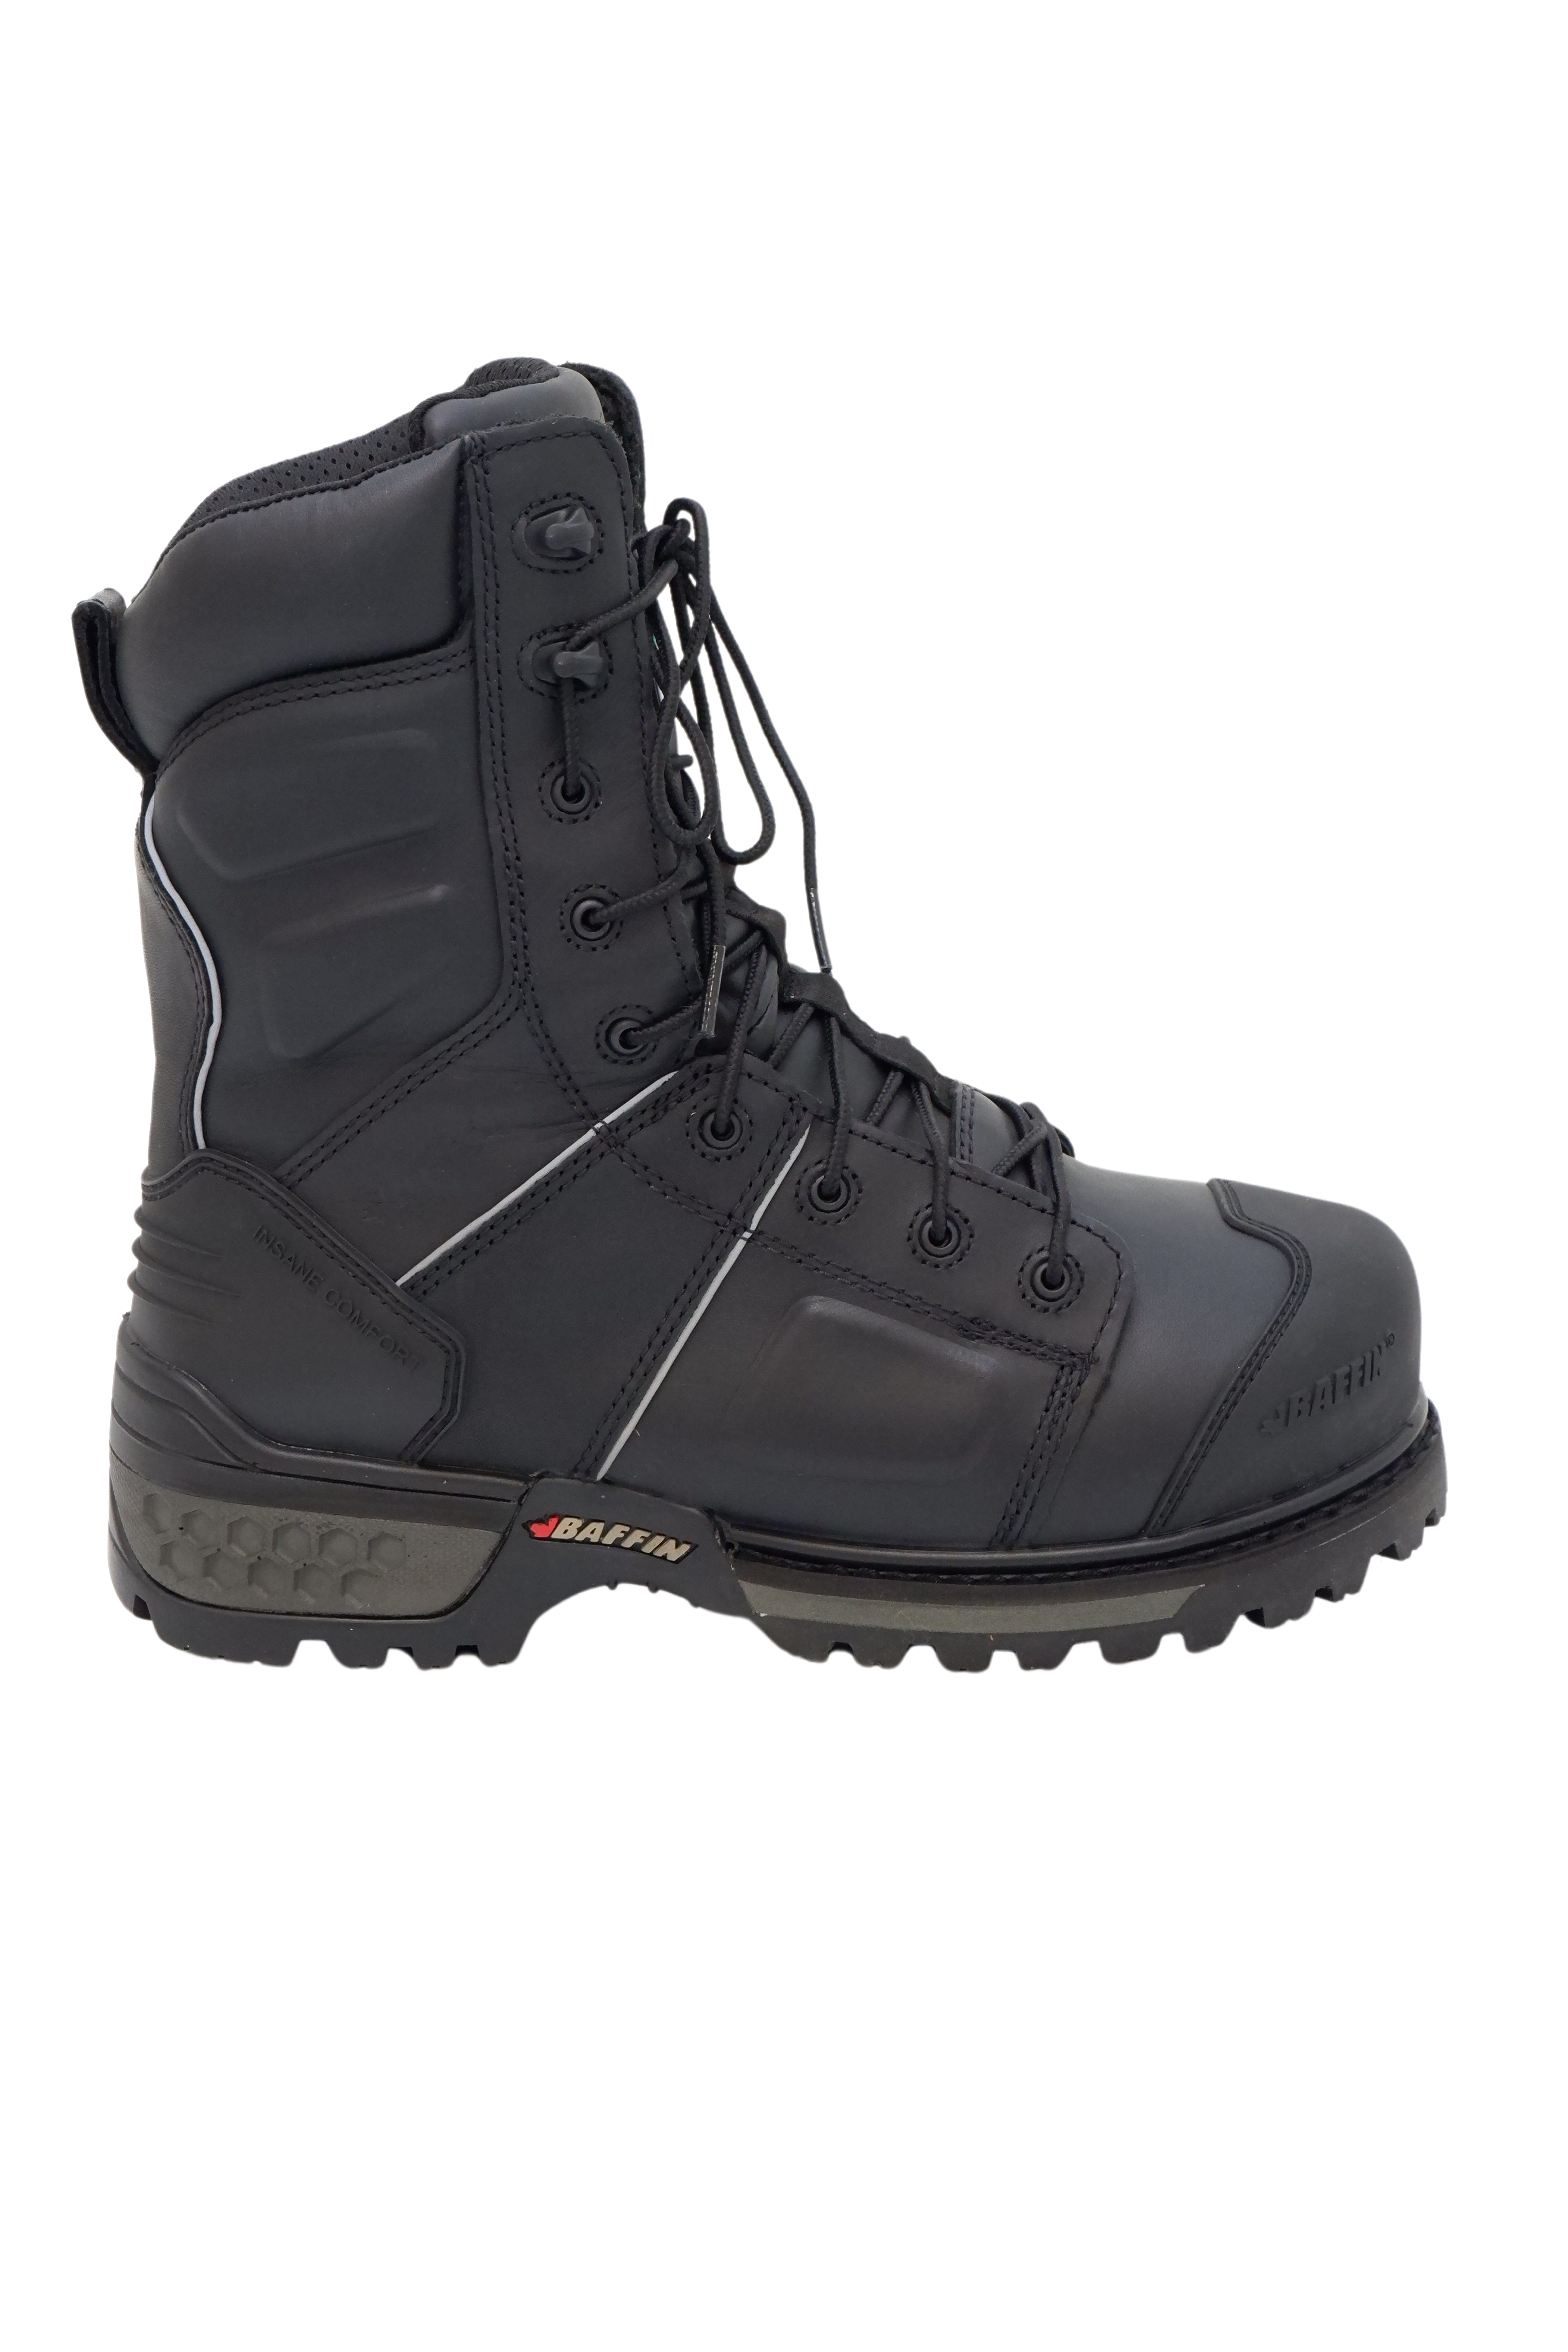 Baffin Men's Safety Work Boots Monster Internal Metguard 8” All Season Leather Waterproof Extreme Comfort with Composite Toe  | Black | Sizes 7 - 14